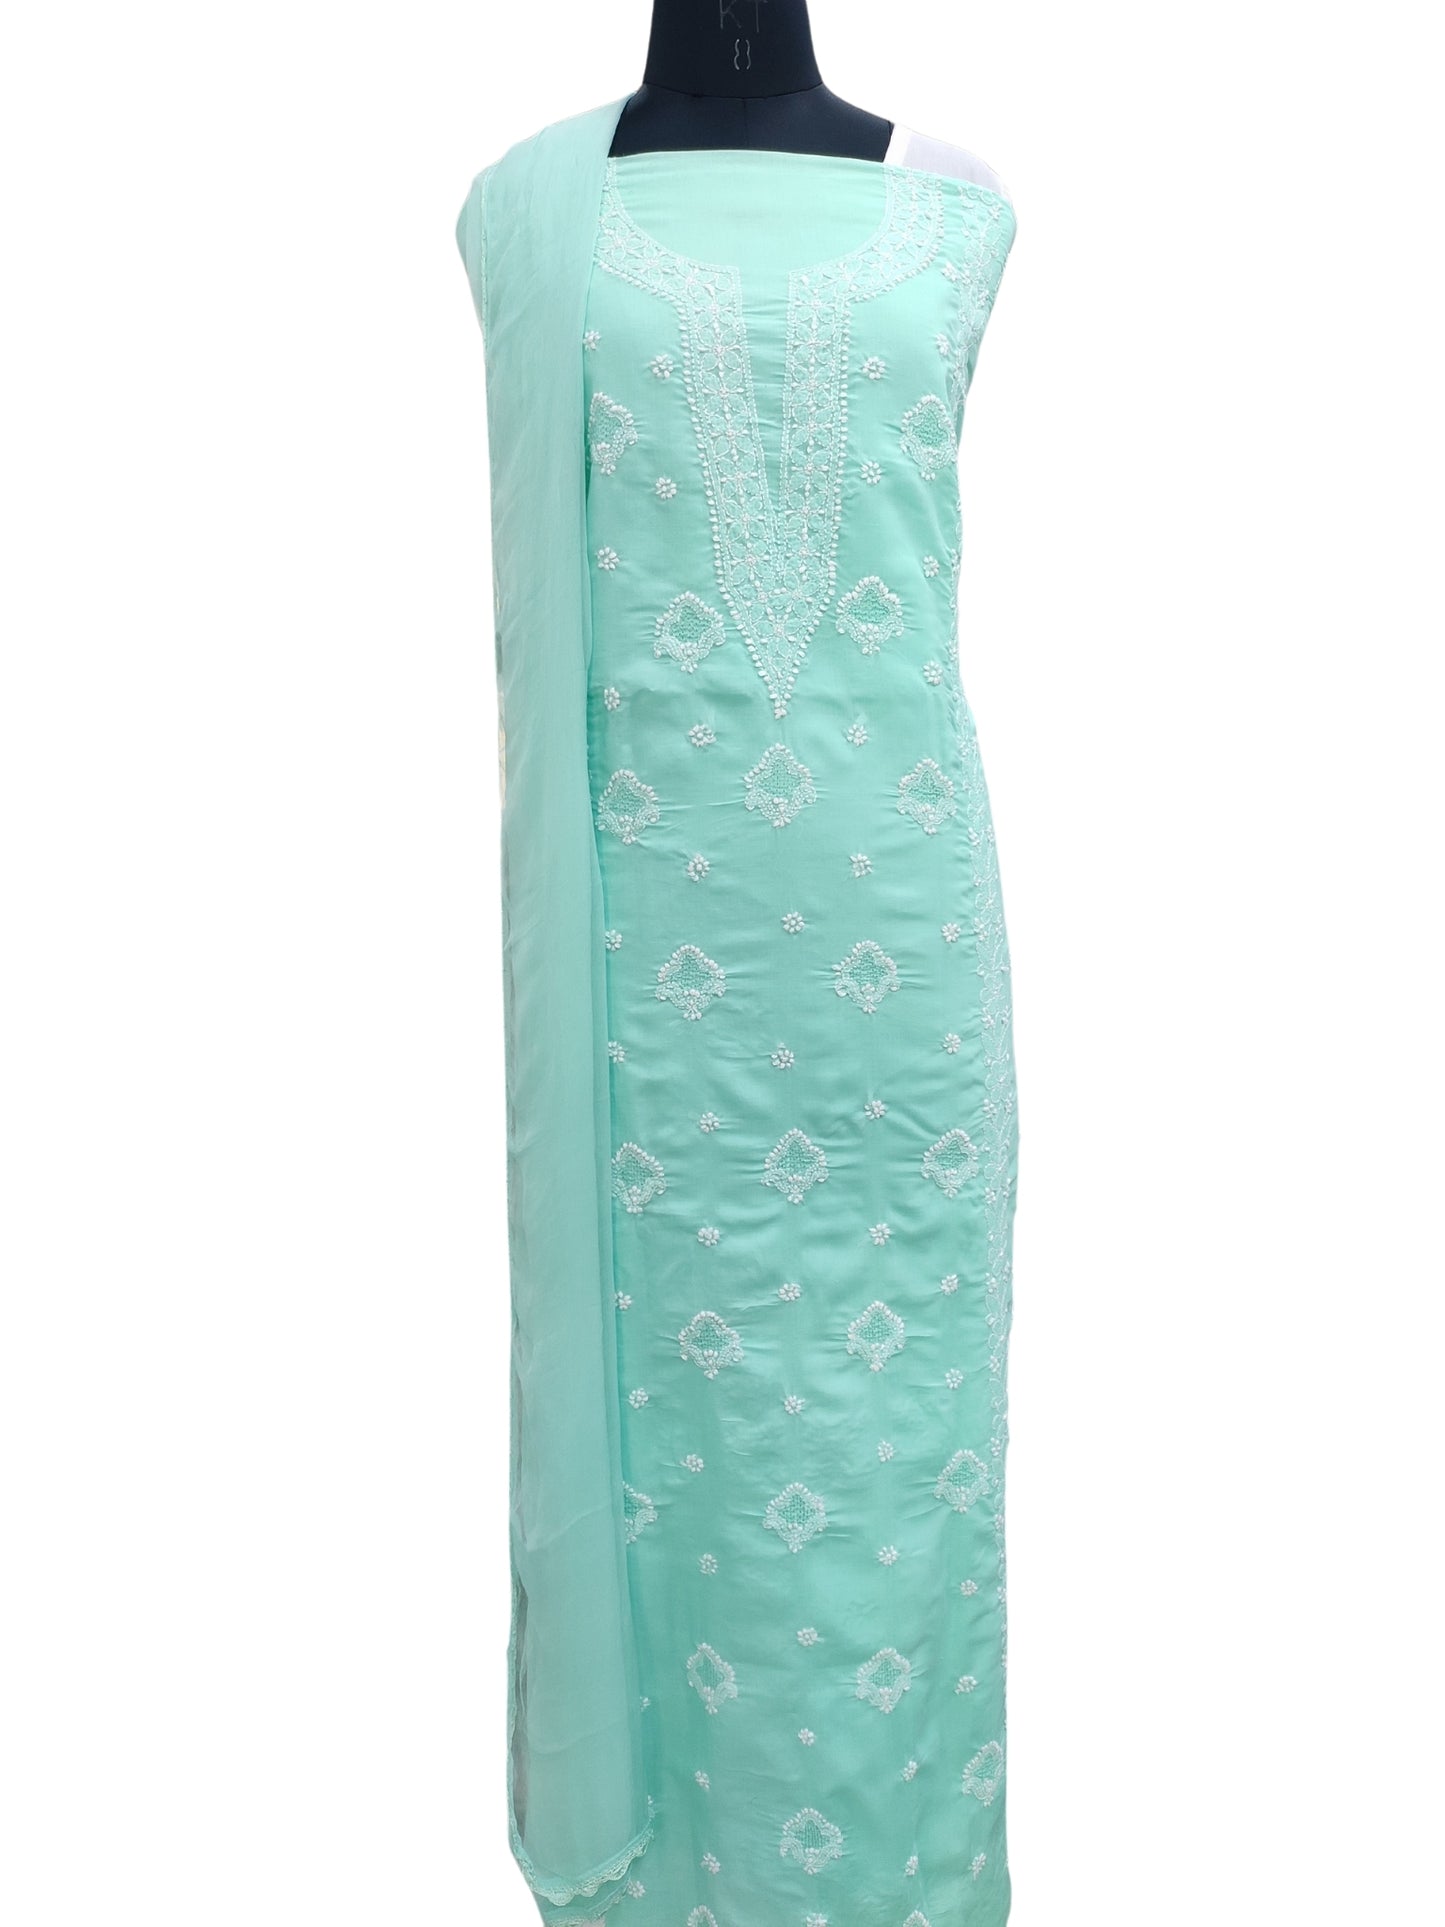 Shyamal Chikan Hand Embroidered Sea Green Cotton Lucknowi Chikankari Unstitched Suit Piece With Jaali Work - S22594